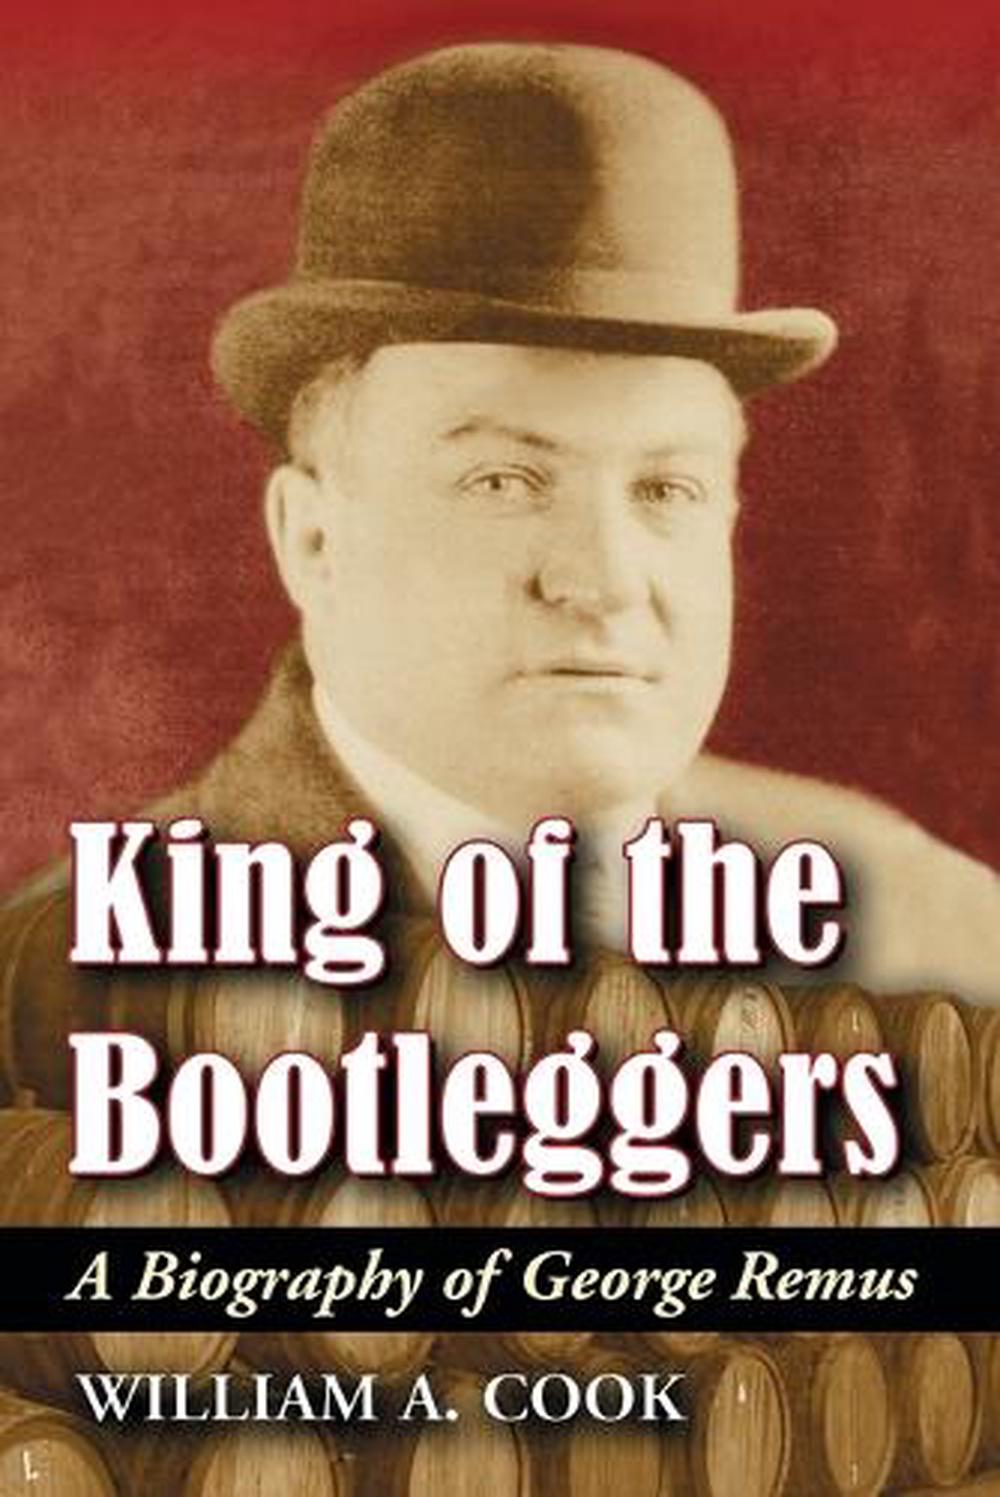 King of the Bootleggers: A Biography of George Remus by William A. Cook ...